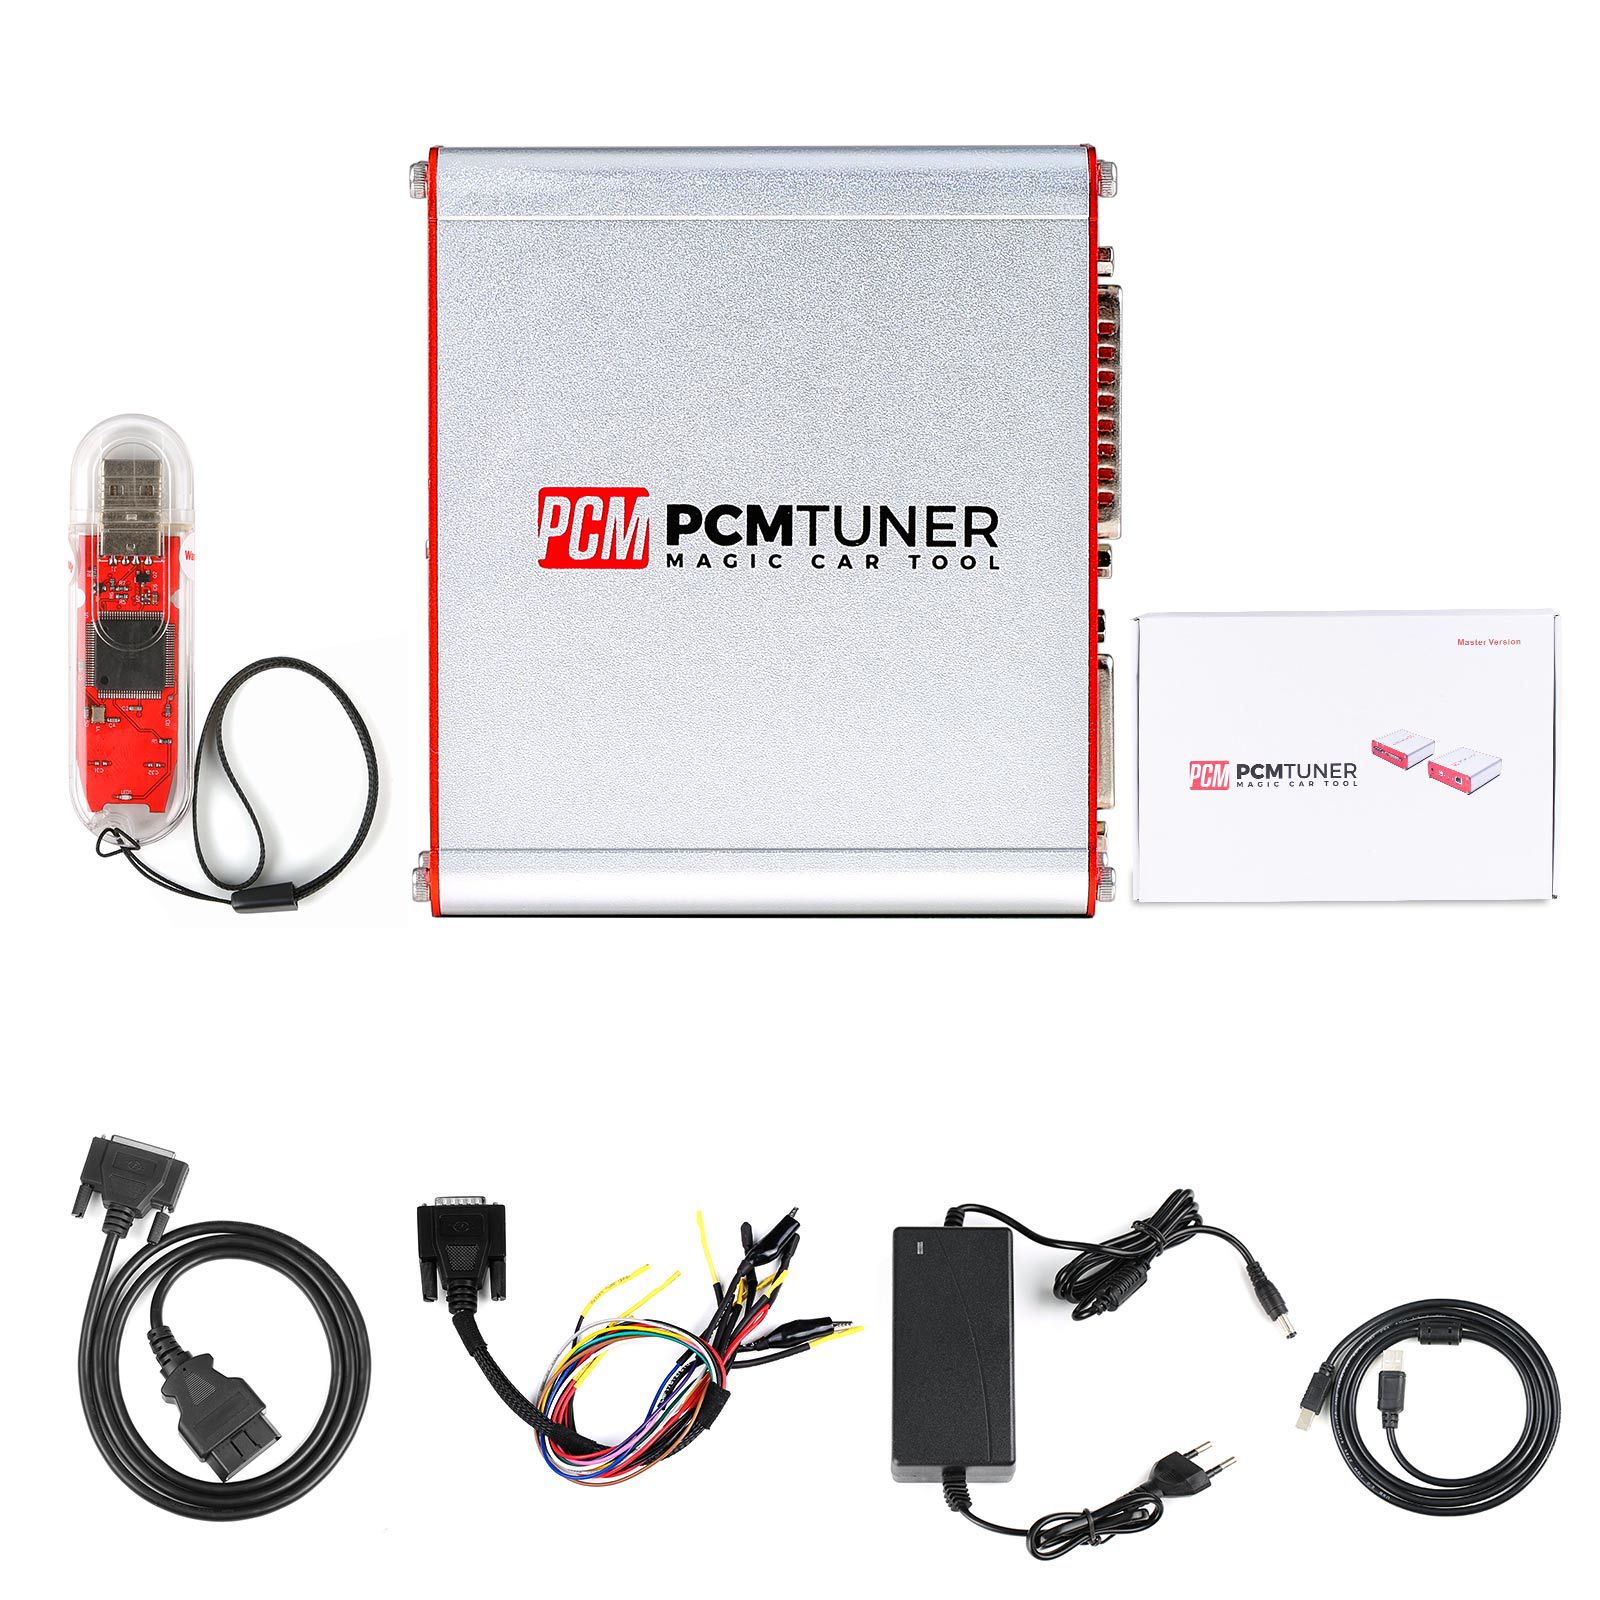 PCMtuner ECU Programmer with 67 Modules with Silicone Case and Plastic Carrying Box